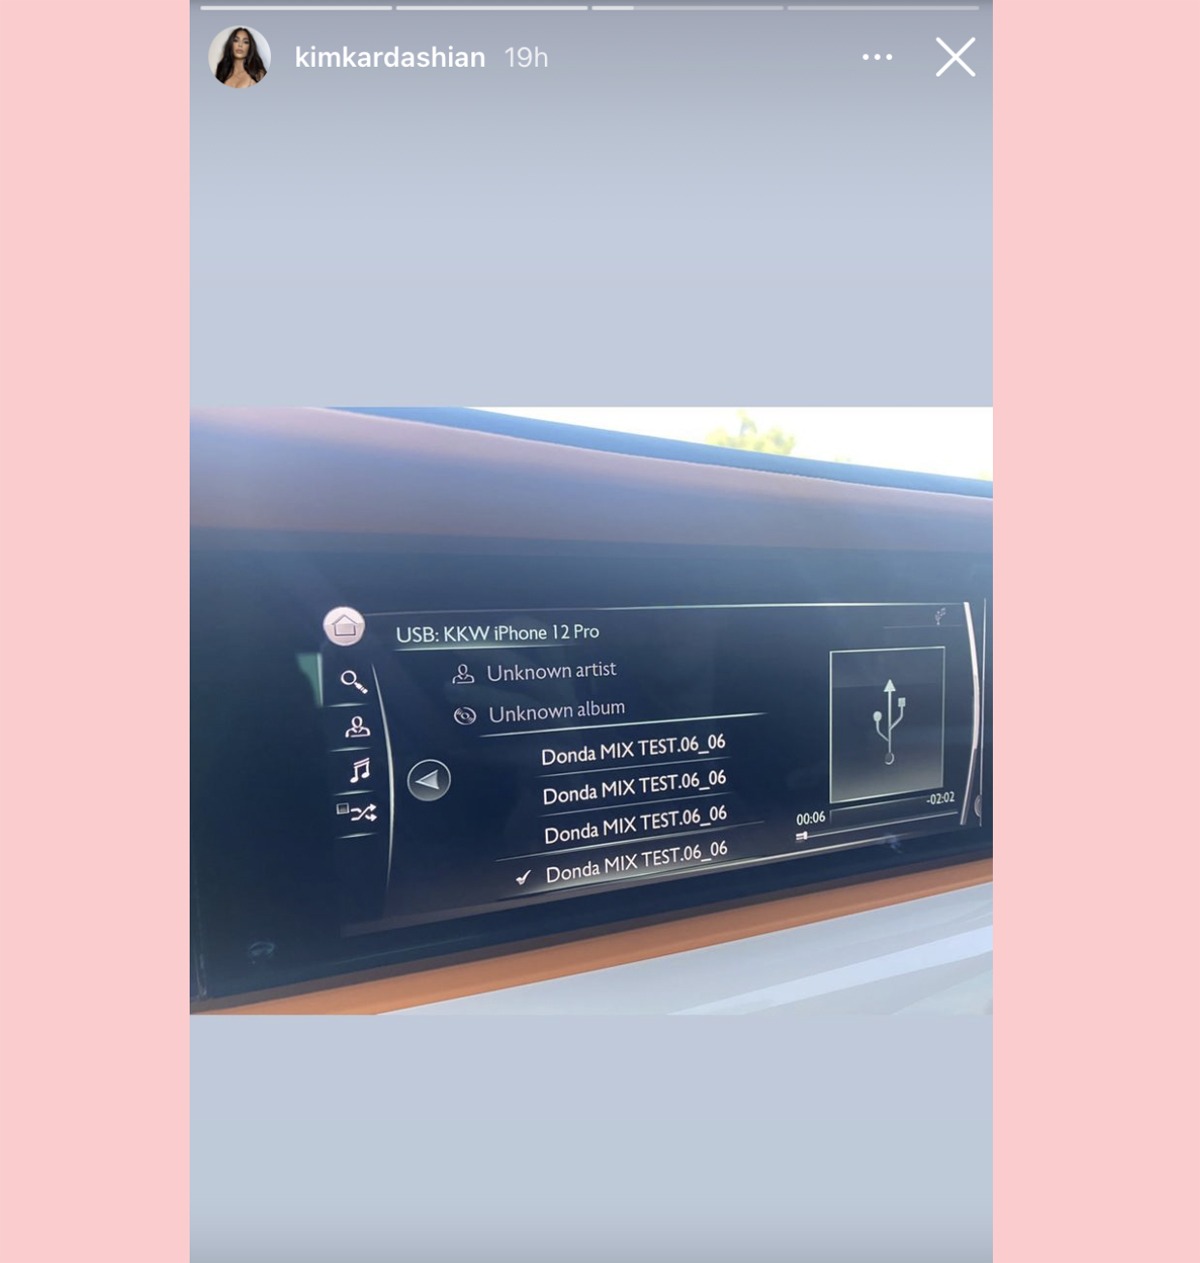 Kim Famous kardashian showed she was listening regarding Kanye West's new 'Donda' delectus while on an outing this weekend present in LA! 